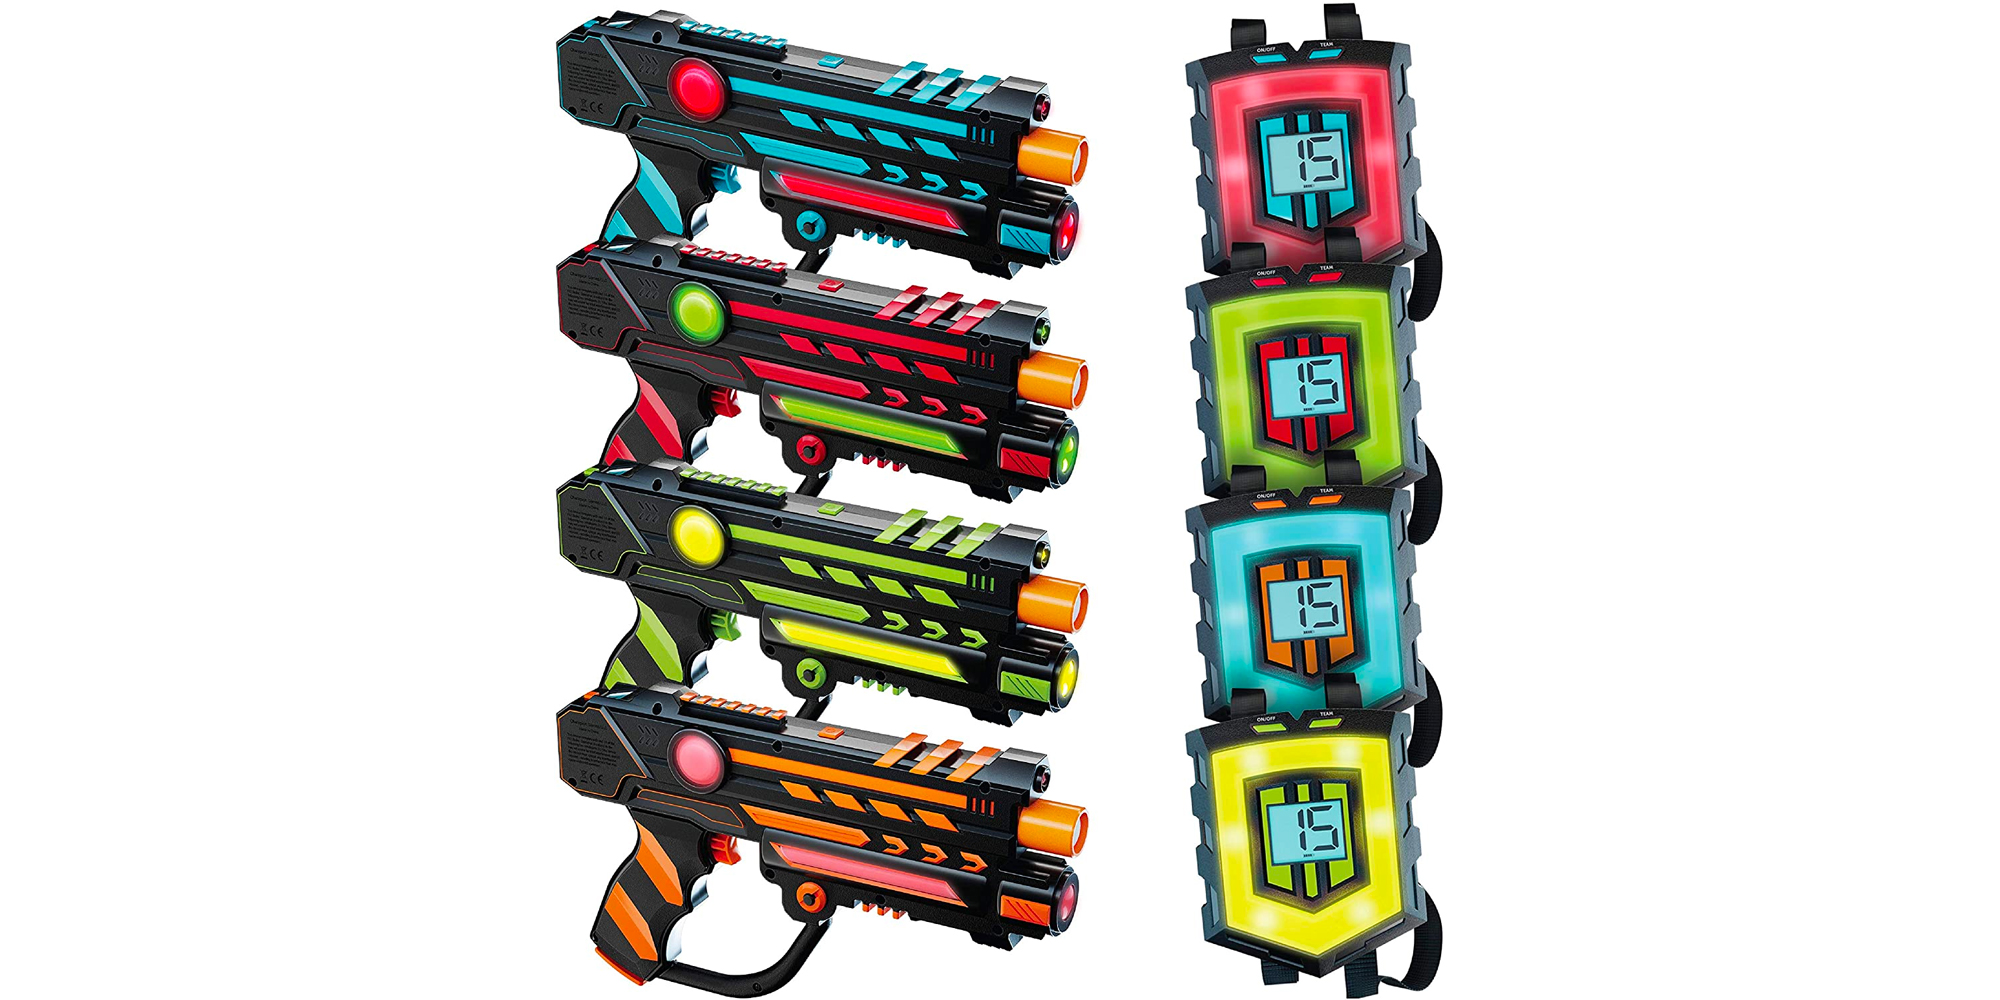 This rechargeable laser tag set keeps the kids busy for $125 (Reg. $170)